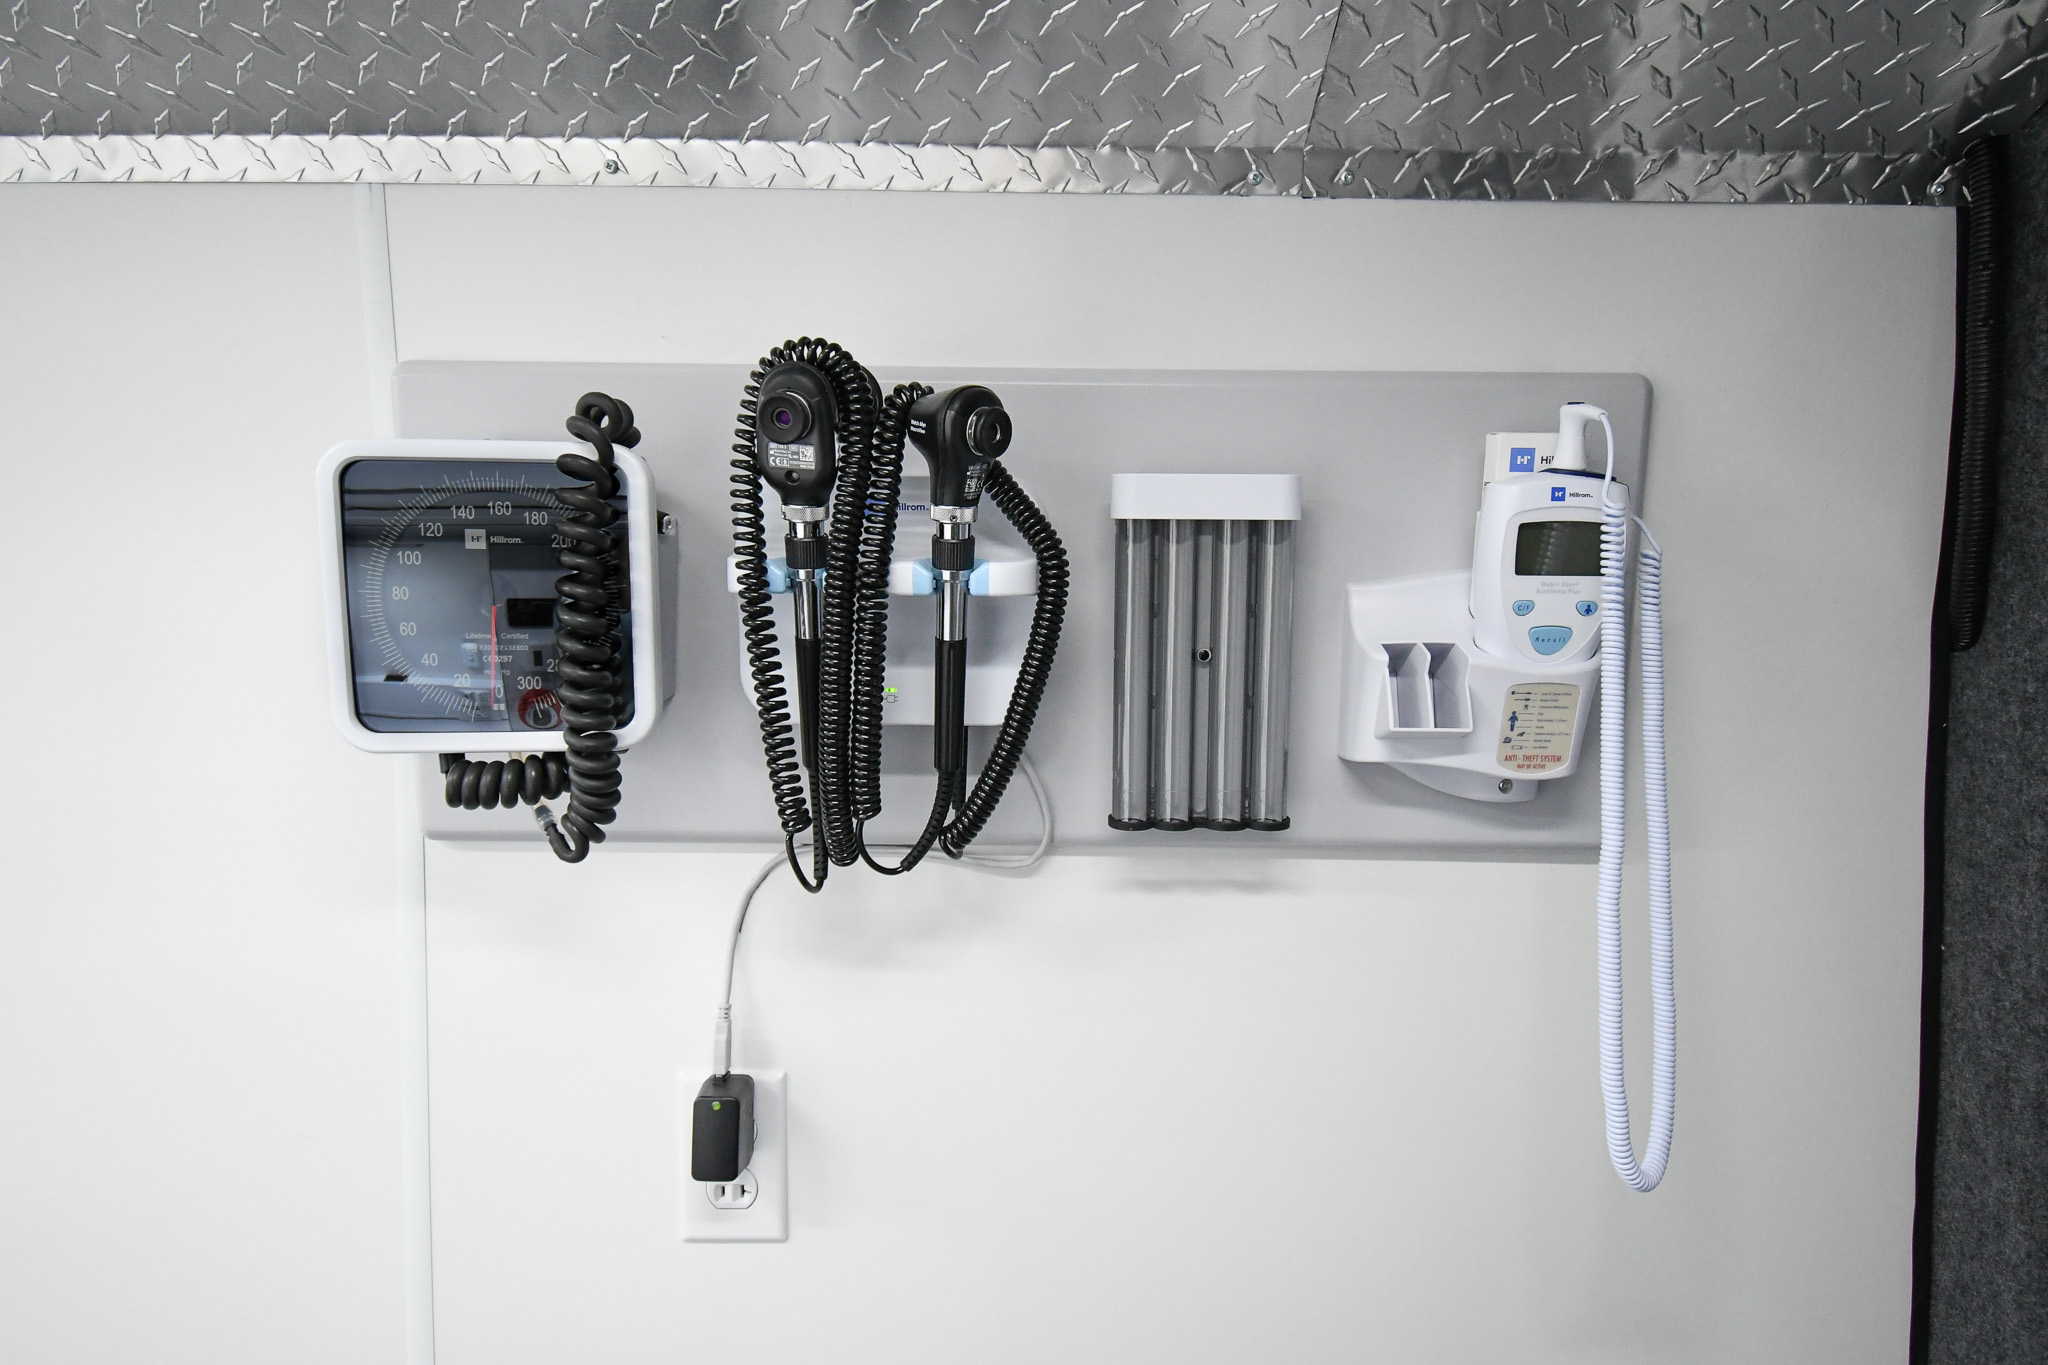 The integrated ENT Diagnostics System inside the unit for Greene County, NY.